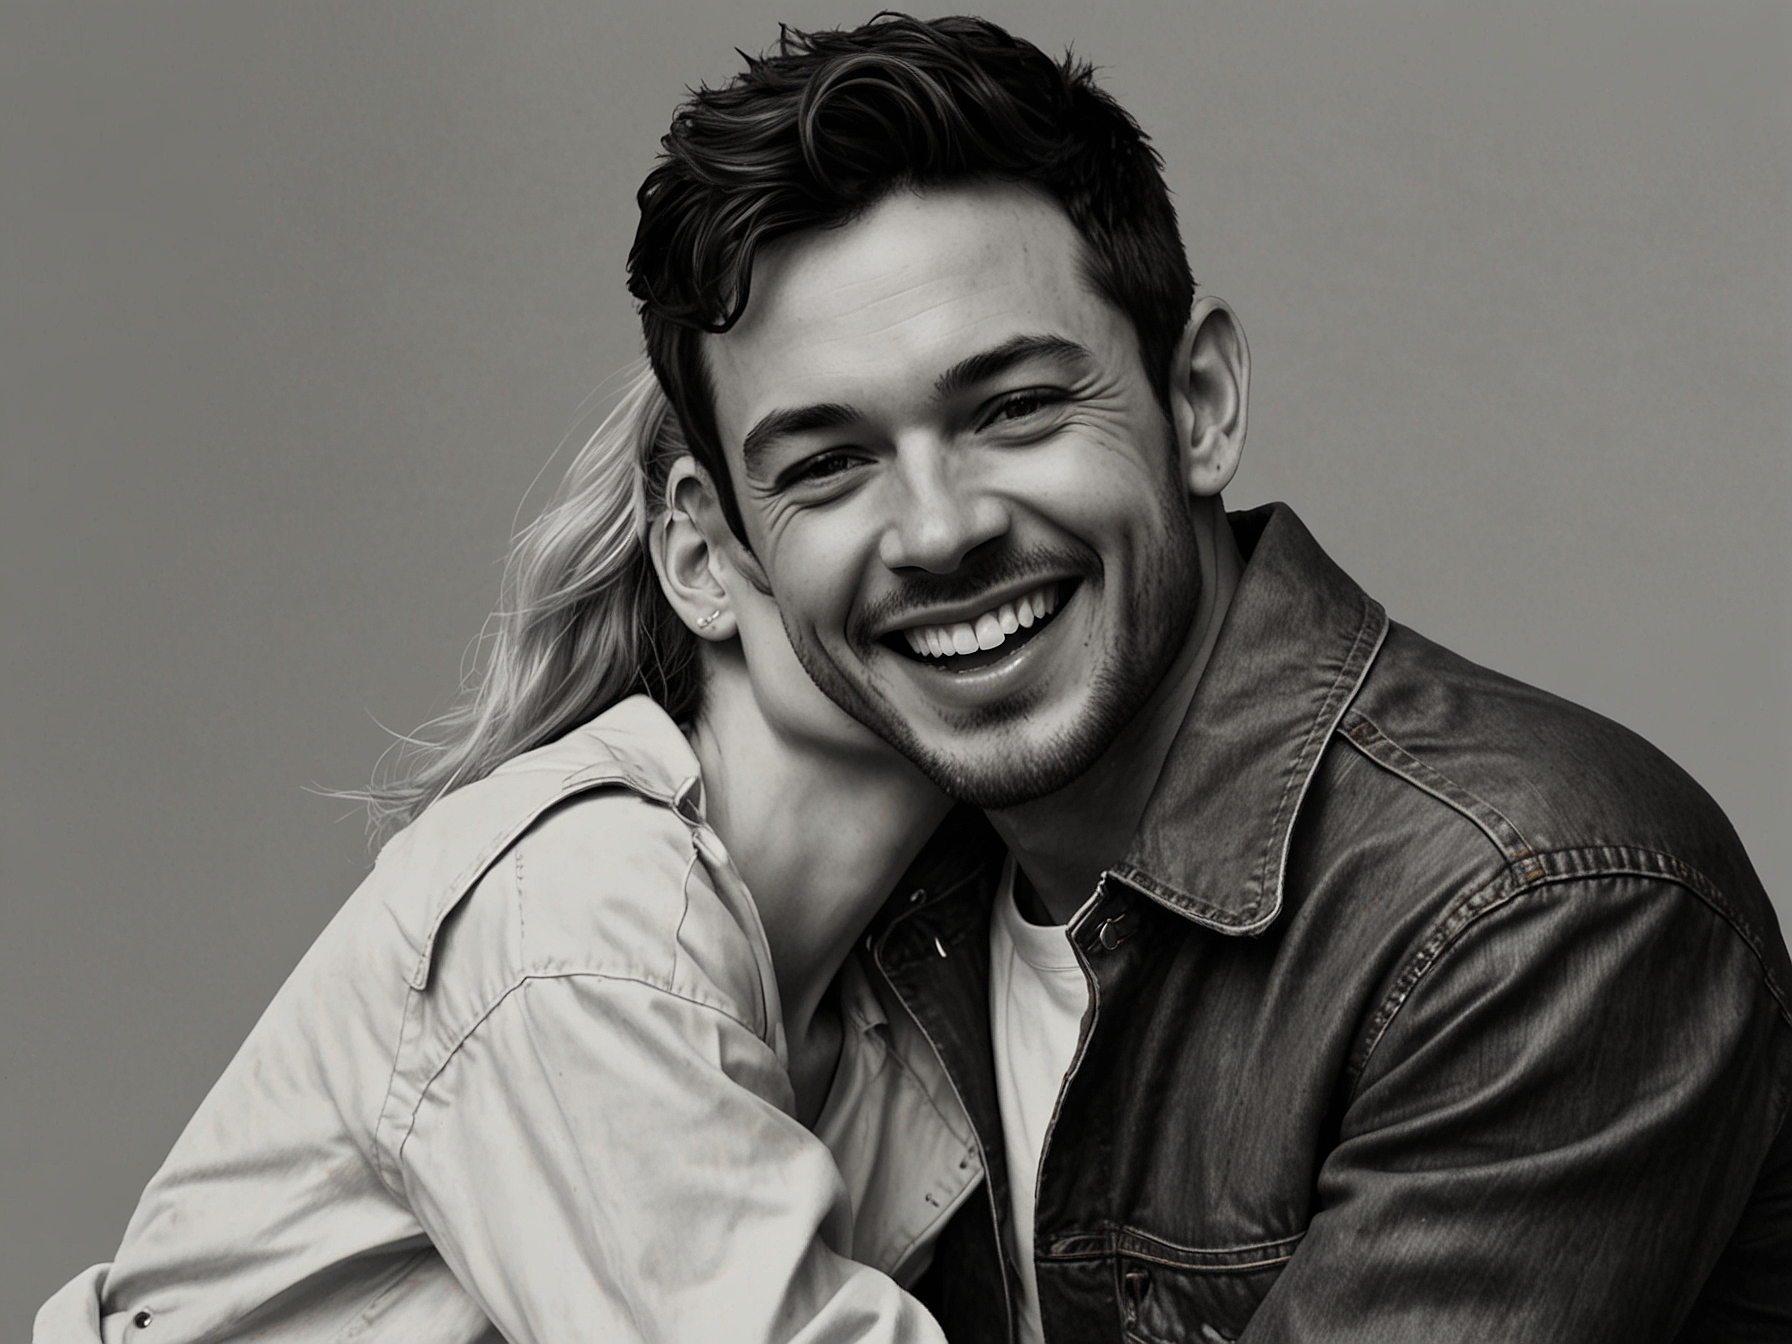 Jonathan Bailey, dressed casually, responds enthusiastically to Kylie Minogue's playful Instagram post, further endearing their quirky and heartwarming bond to fans across the globe.